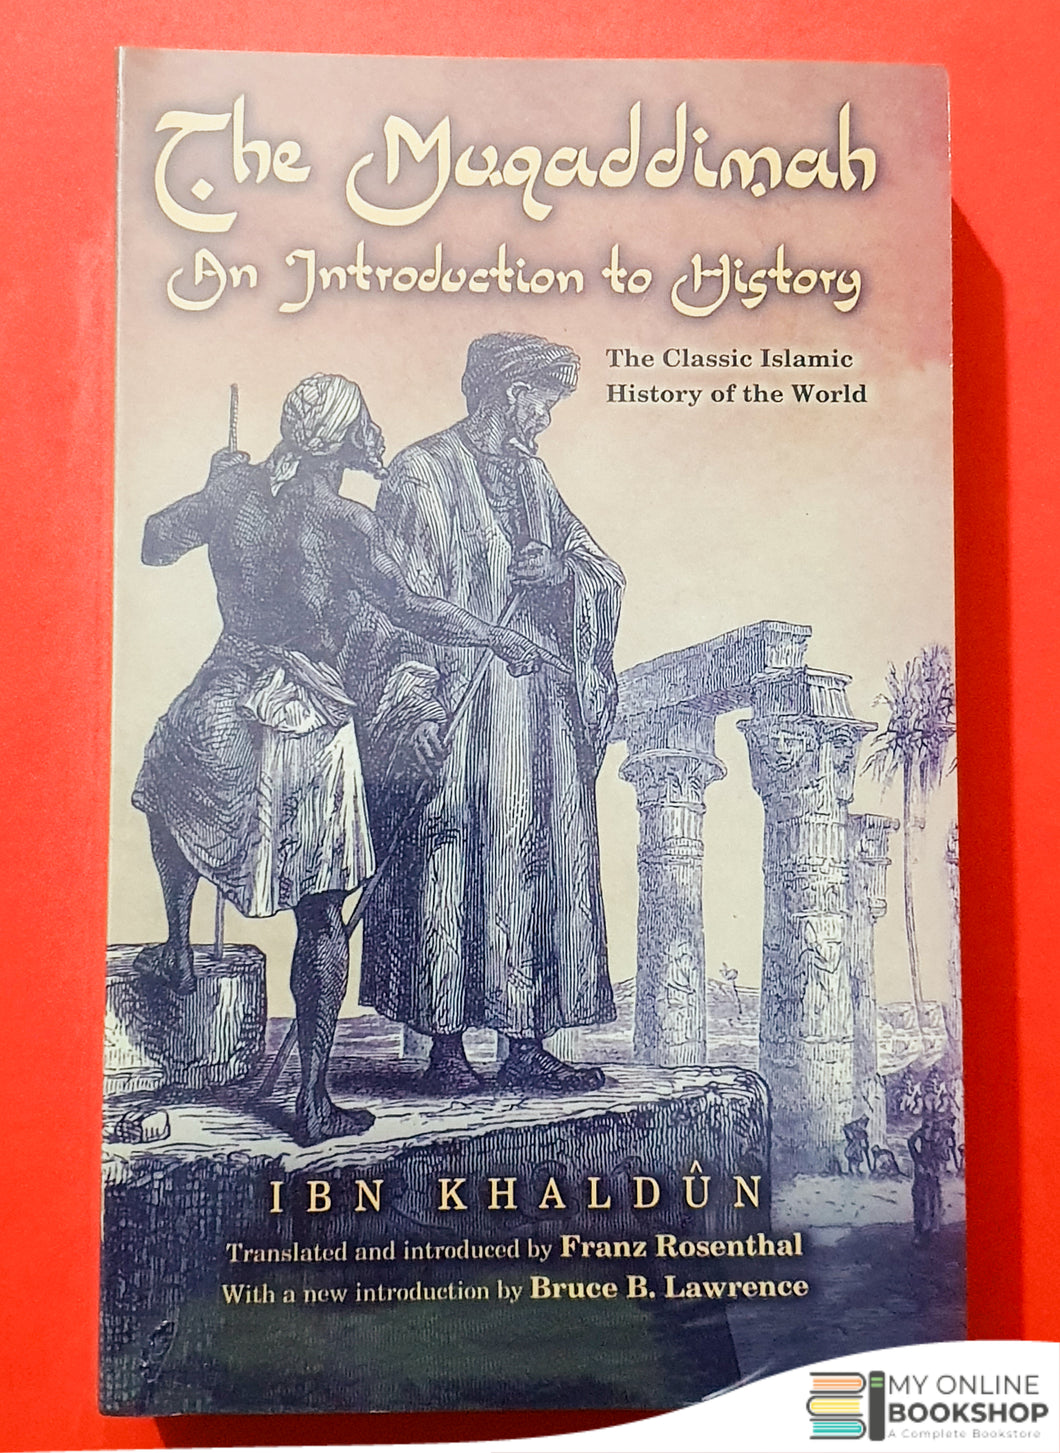 The Muqaddimah An introduction to History the Classic Islamic History of the World